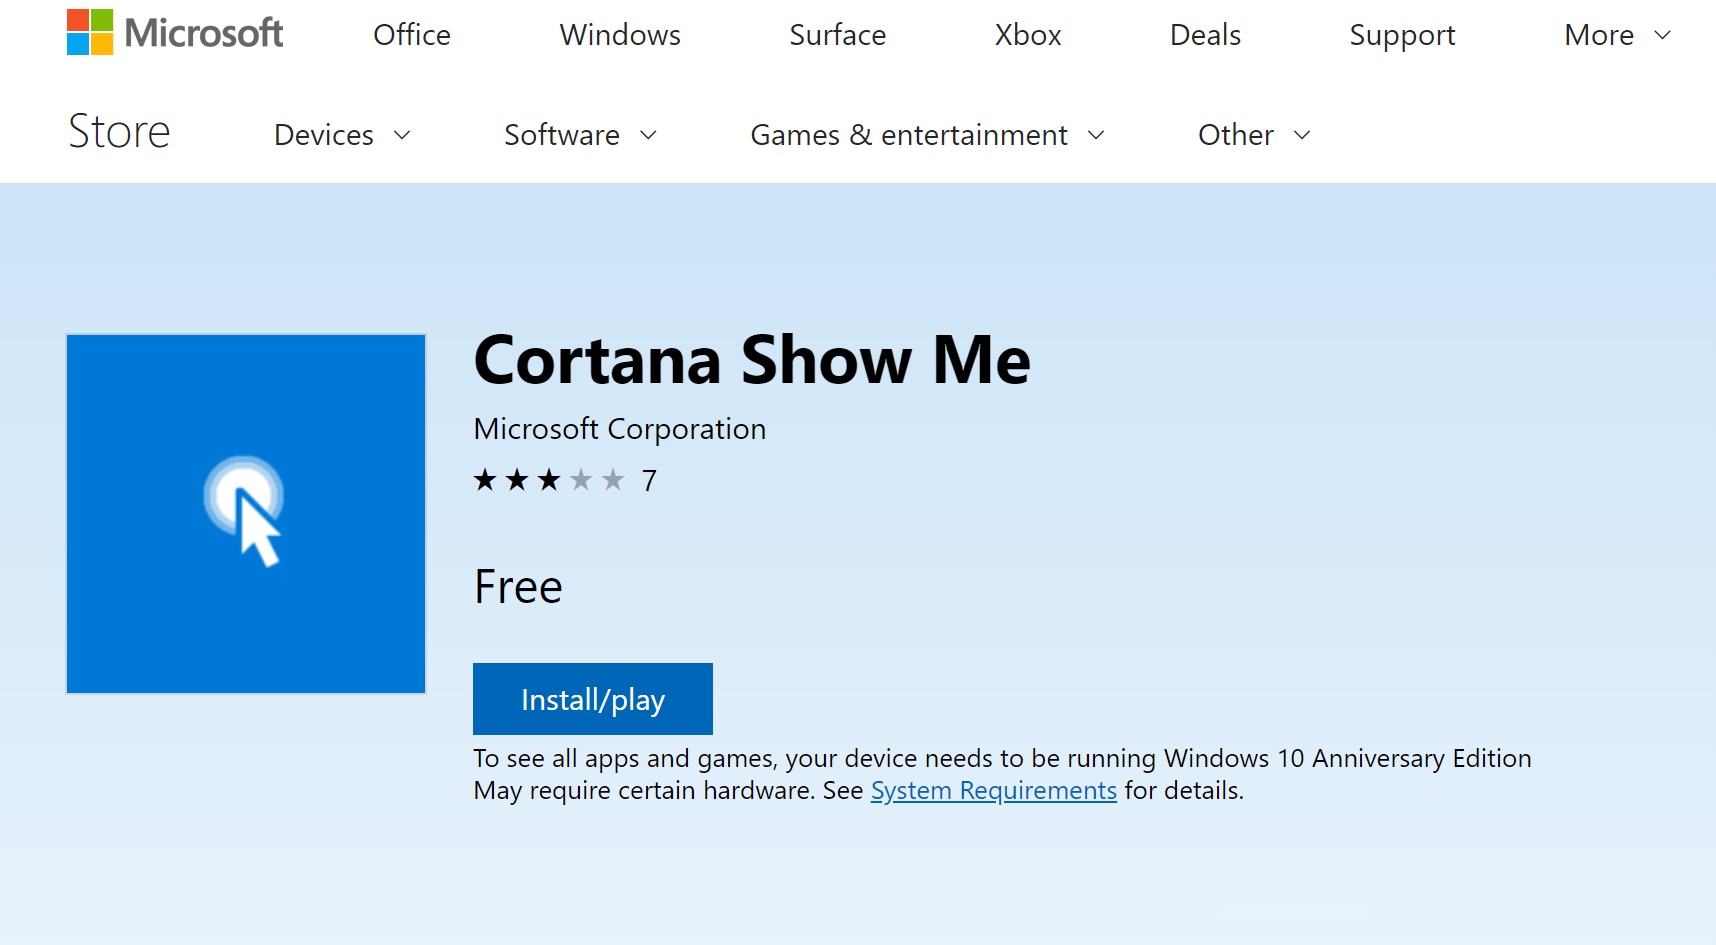 Latest Windows 10 Preview build hints to expansion of Cortana to much more than asking boring questions